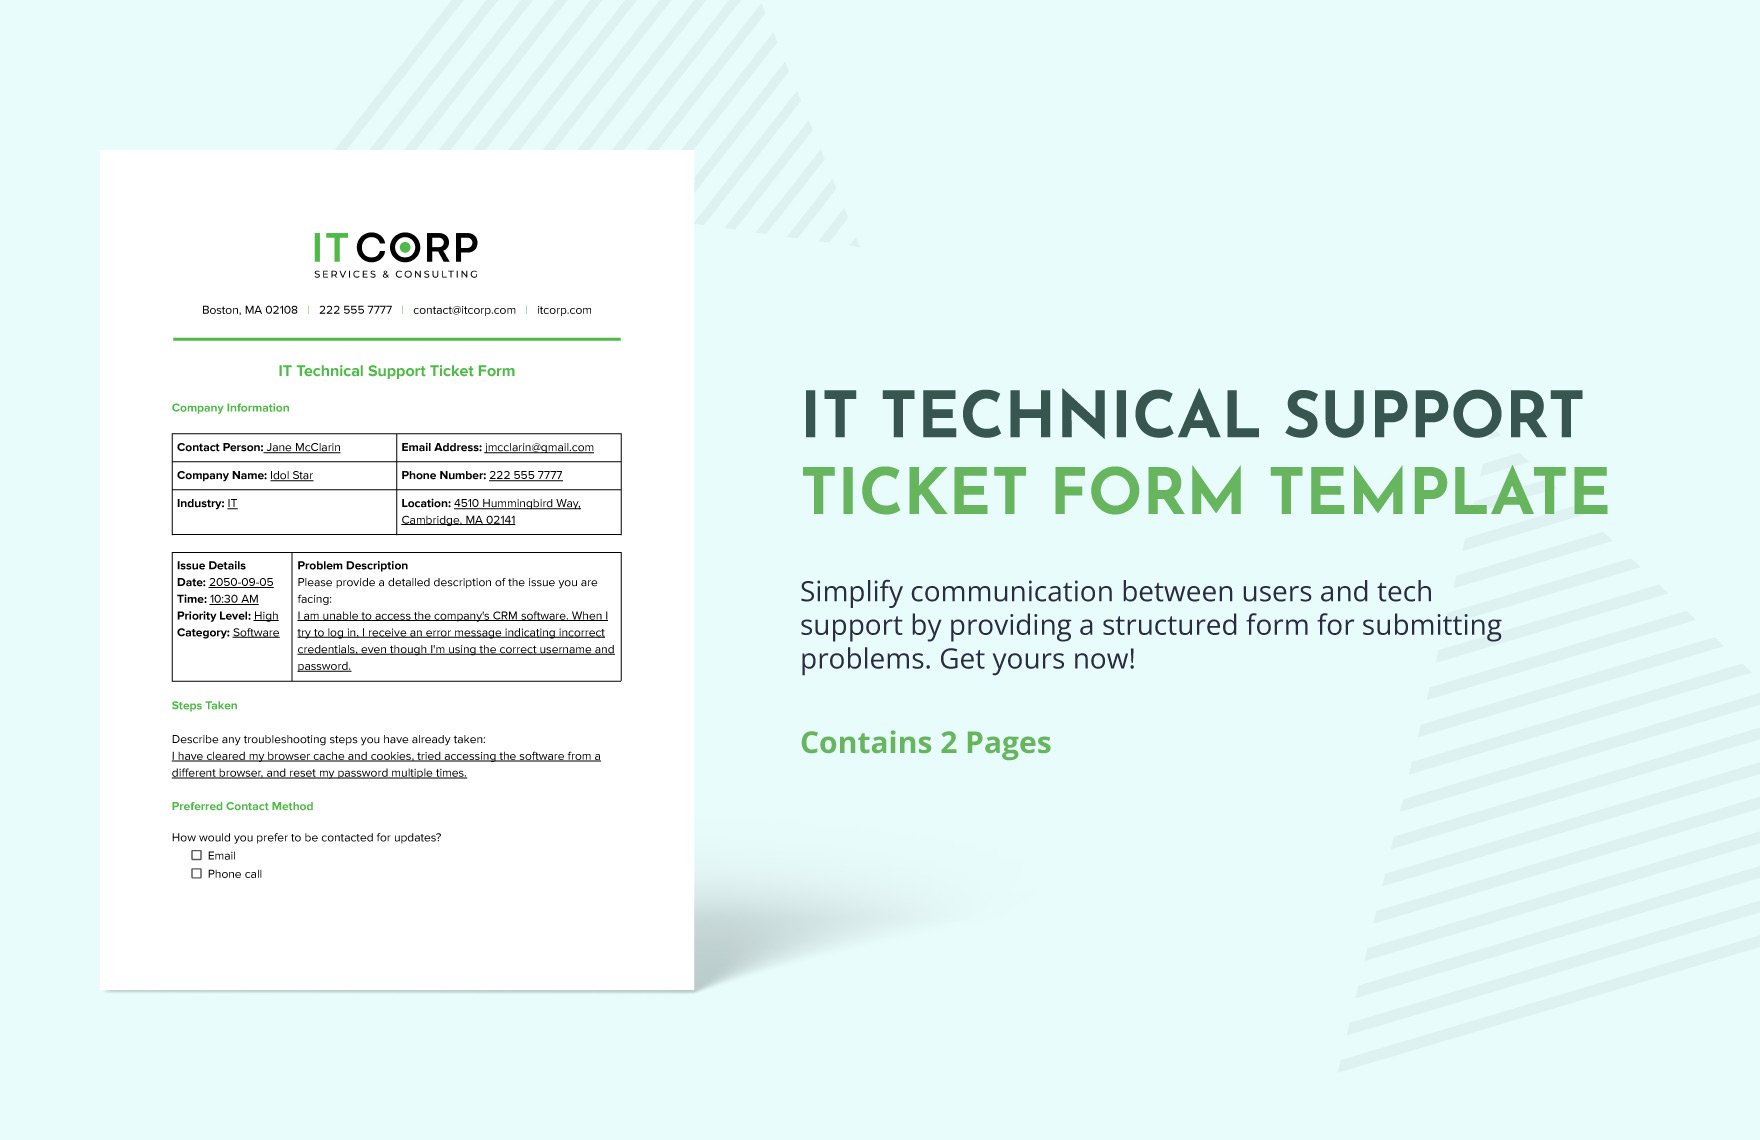 IT Technical Support Ticket Form Template